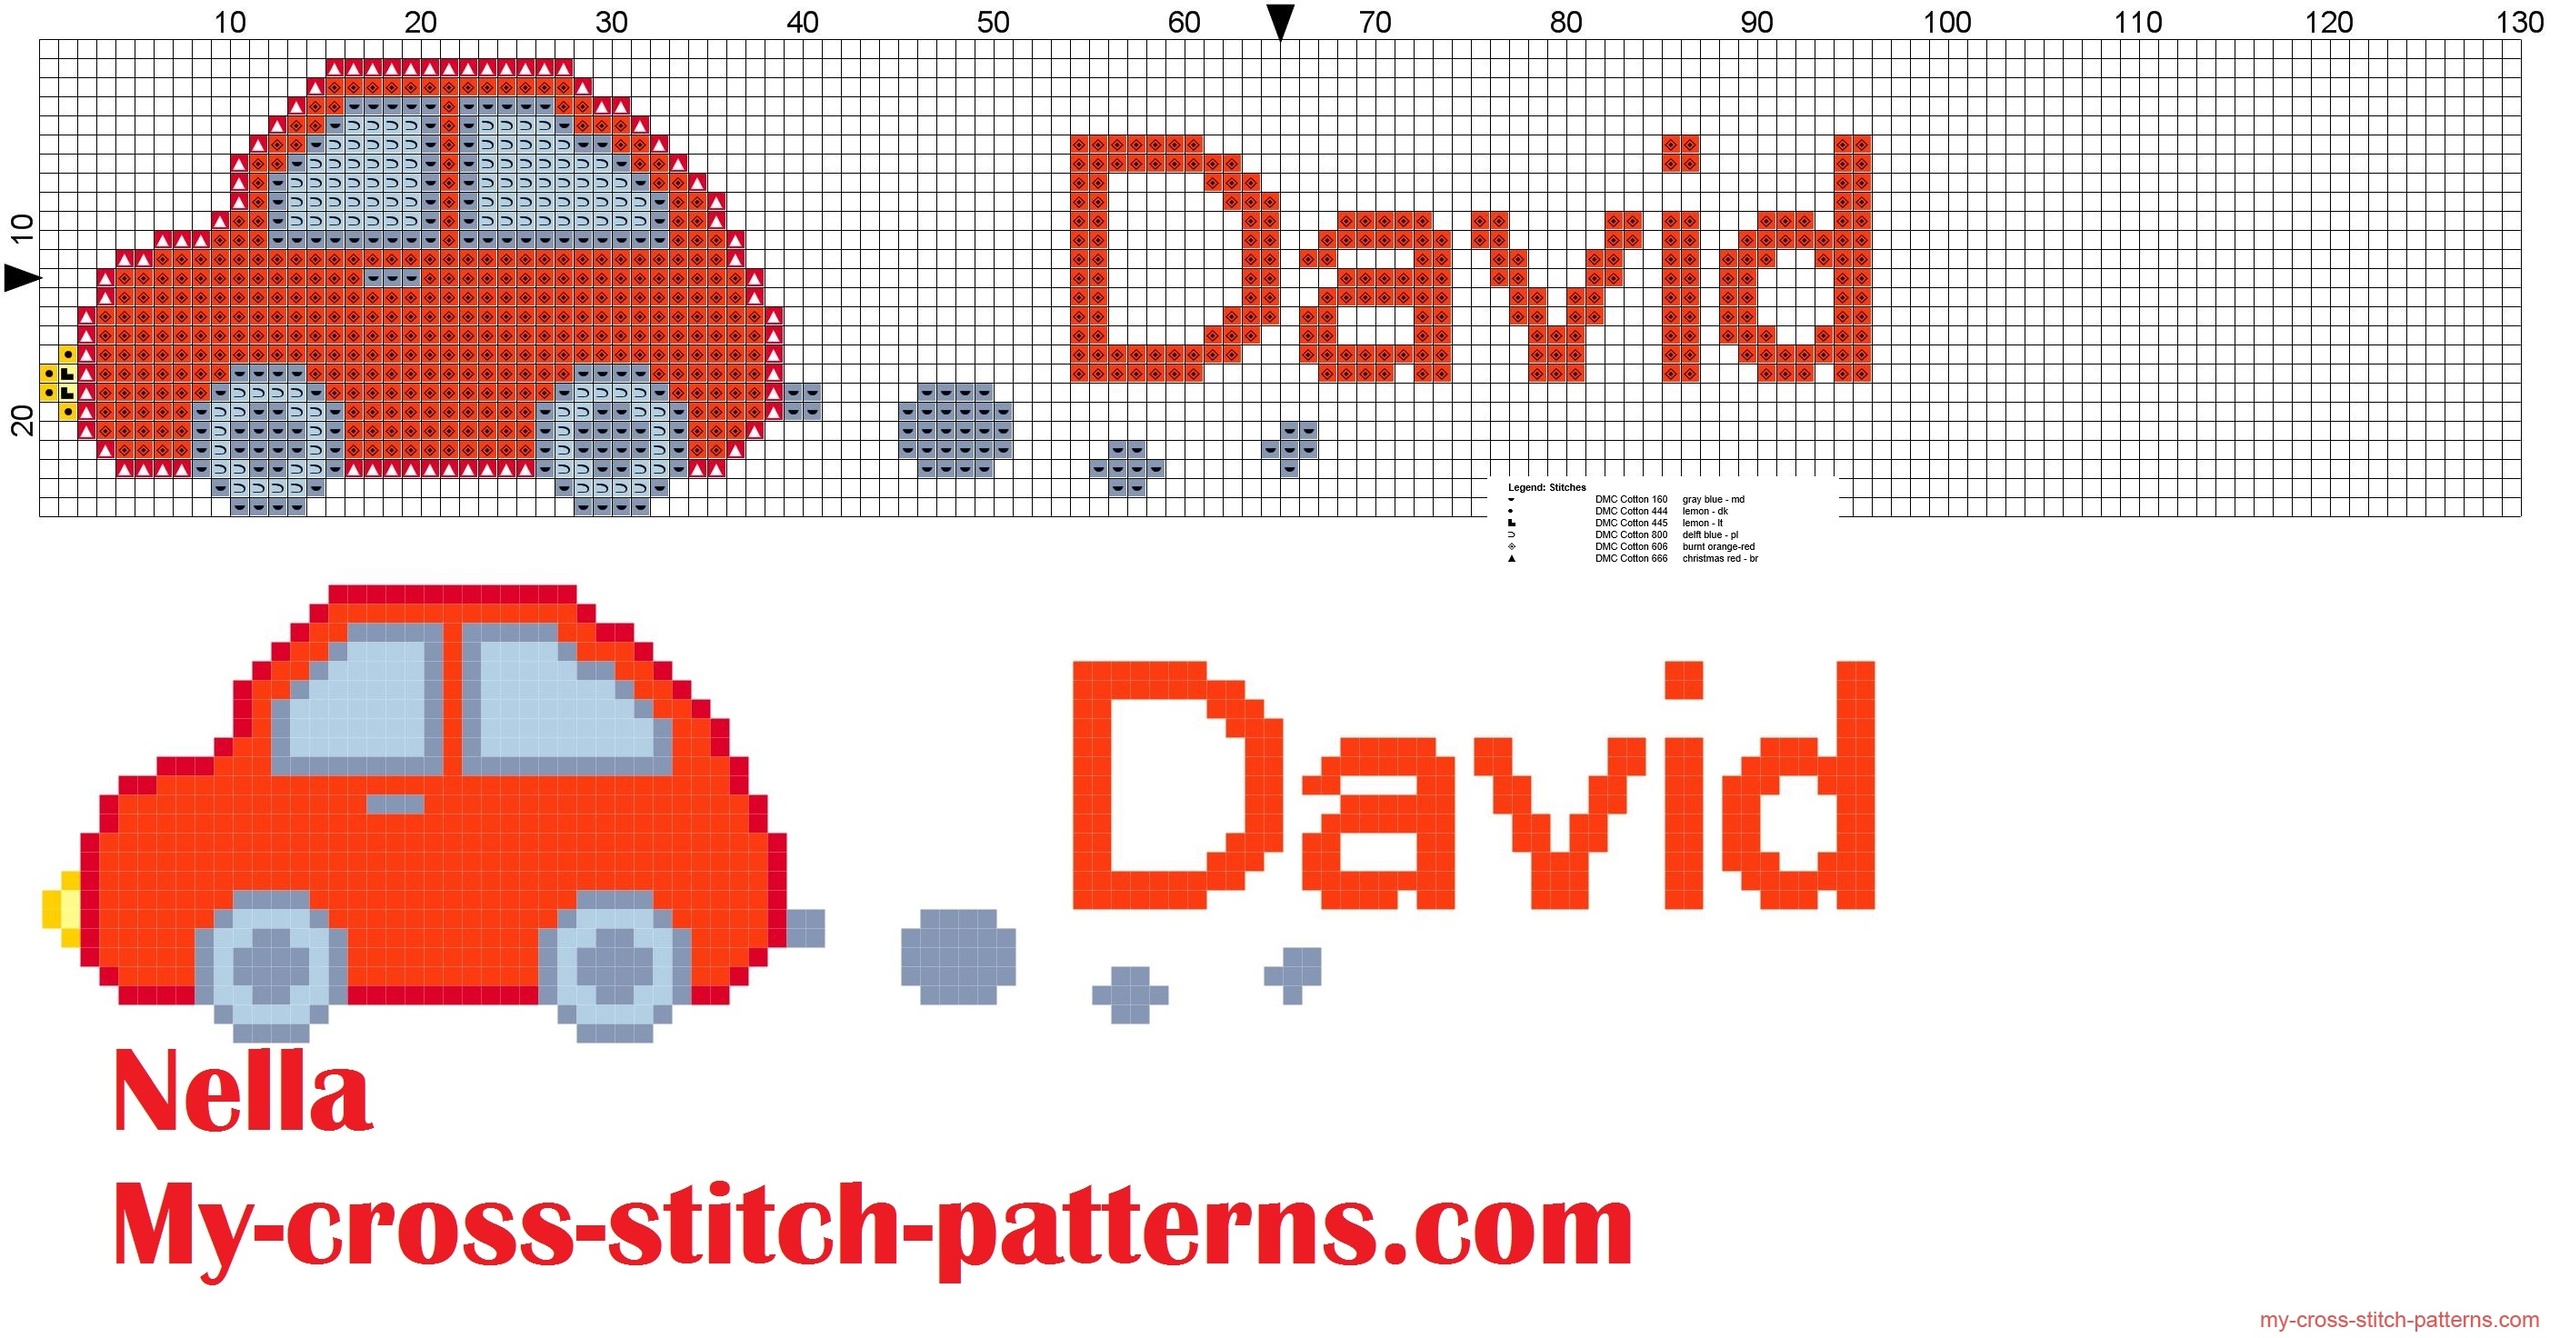 david_name_with_toy_car_cross_stitch_patterns